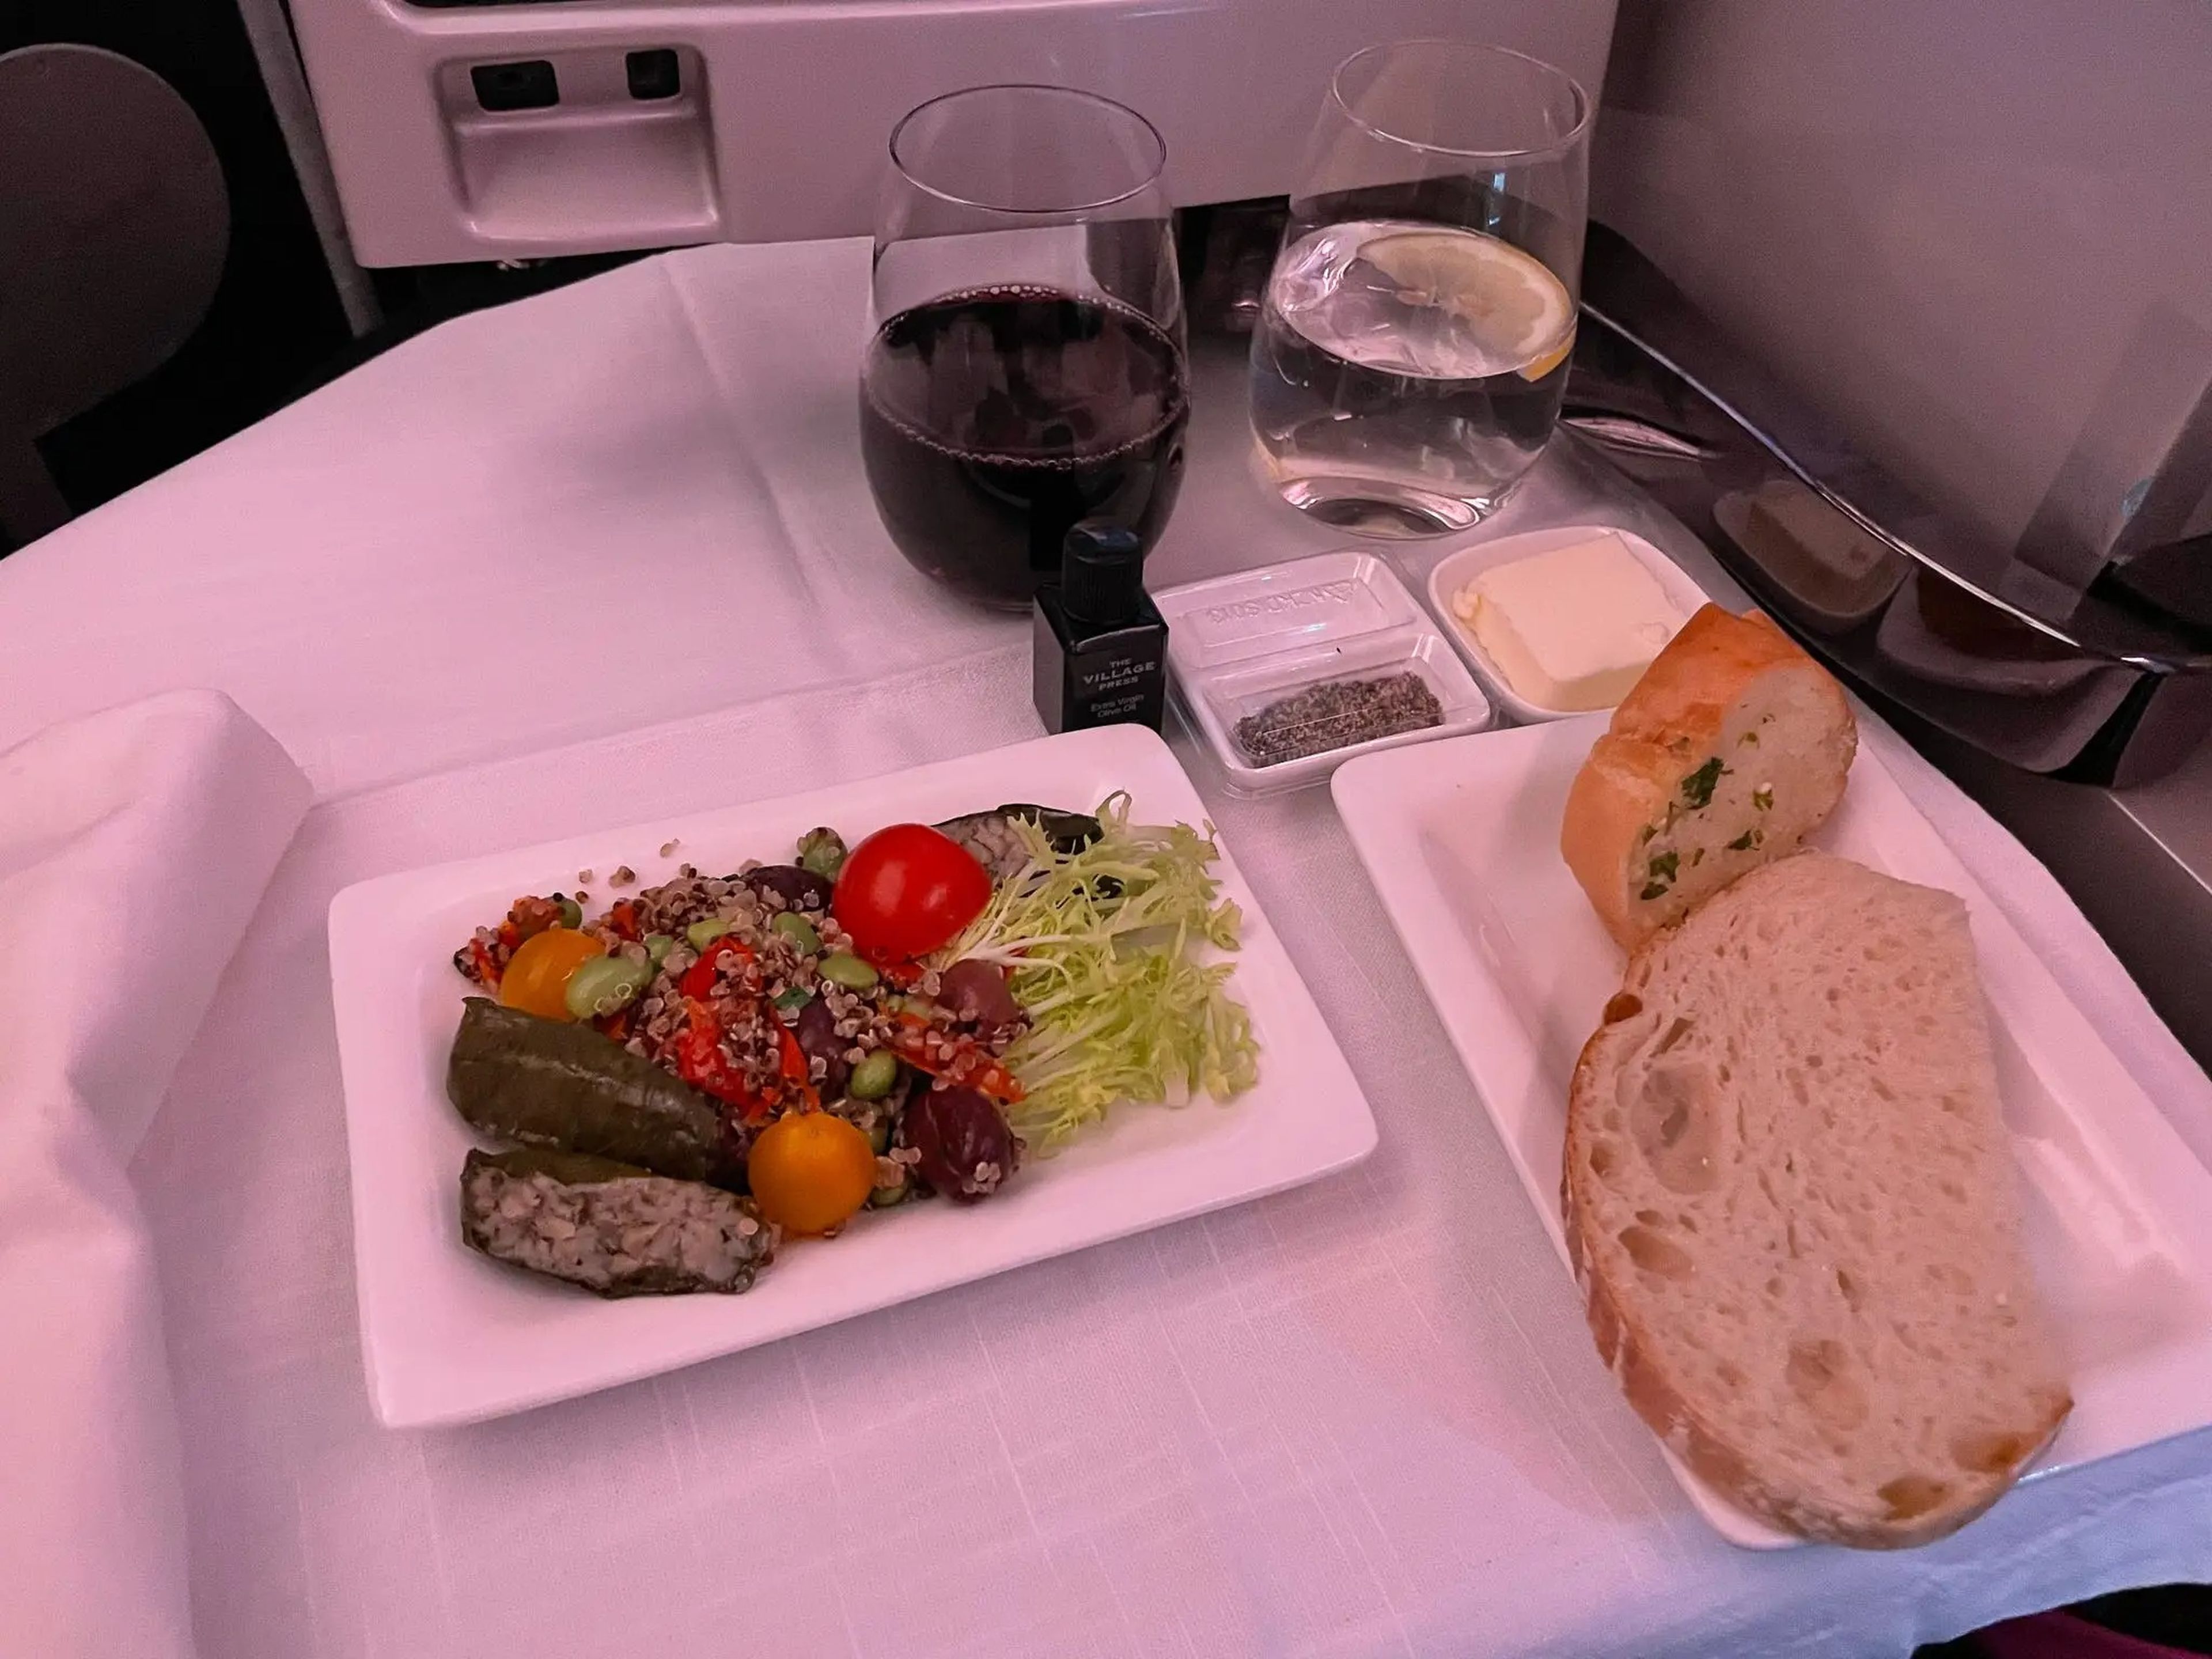 The author's first-course meal on her Air New Zealand flight.